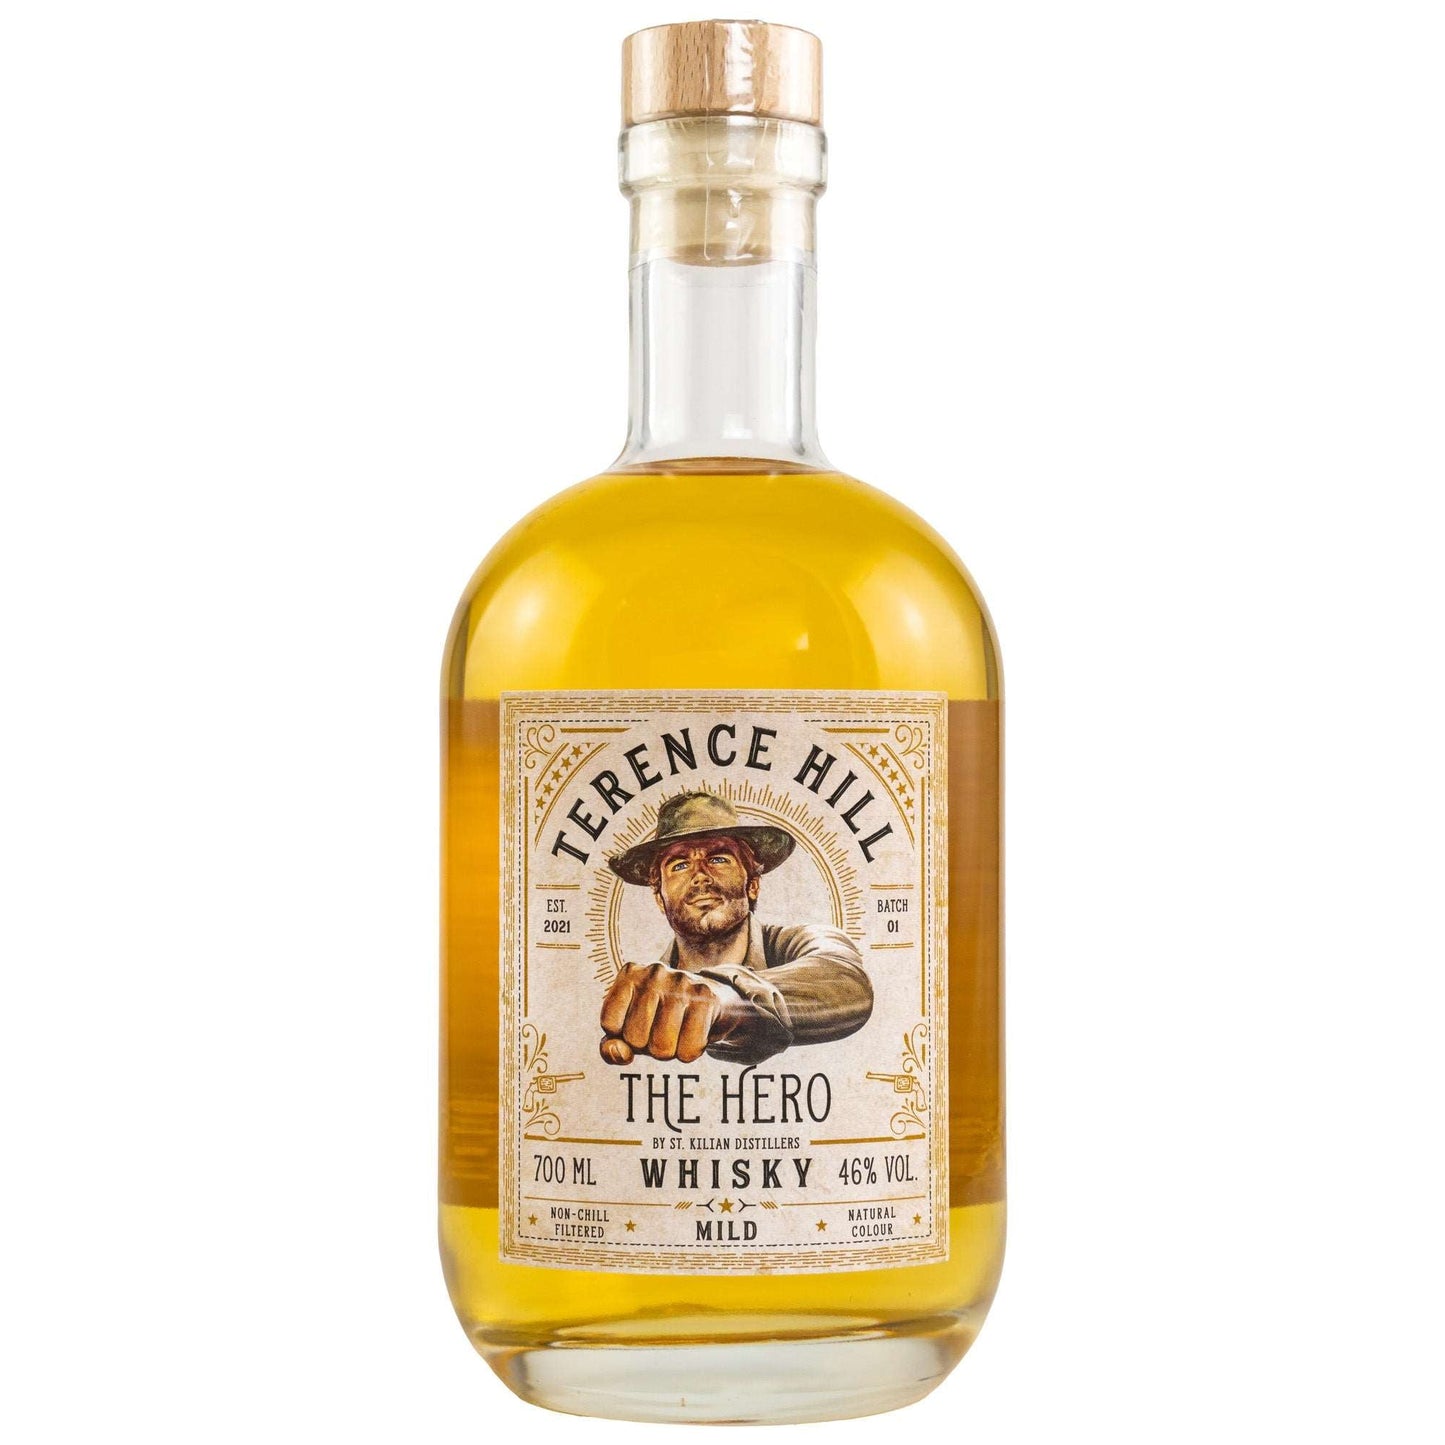 Terence Hill | The Hero Whisky | Mild | Batch 01 | 0,7l | 46%GET A BOTTLE